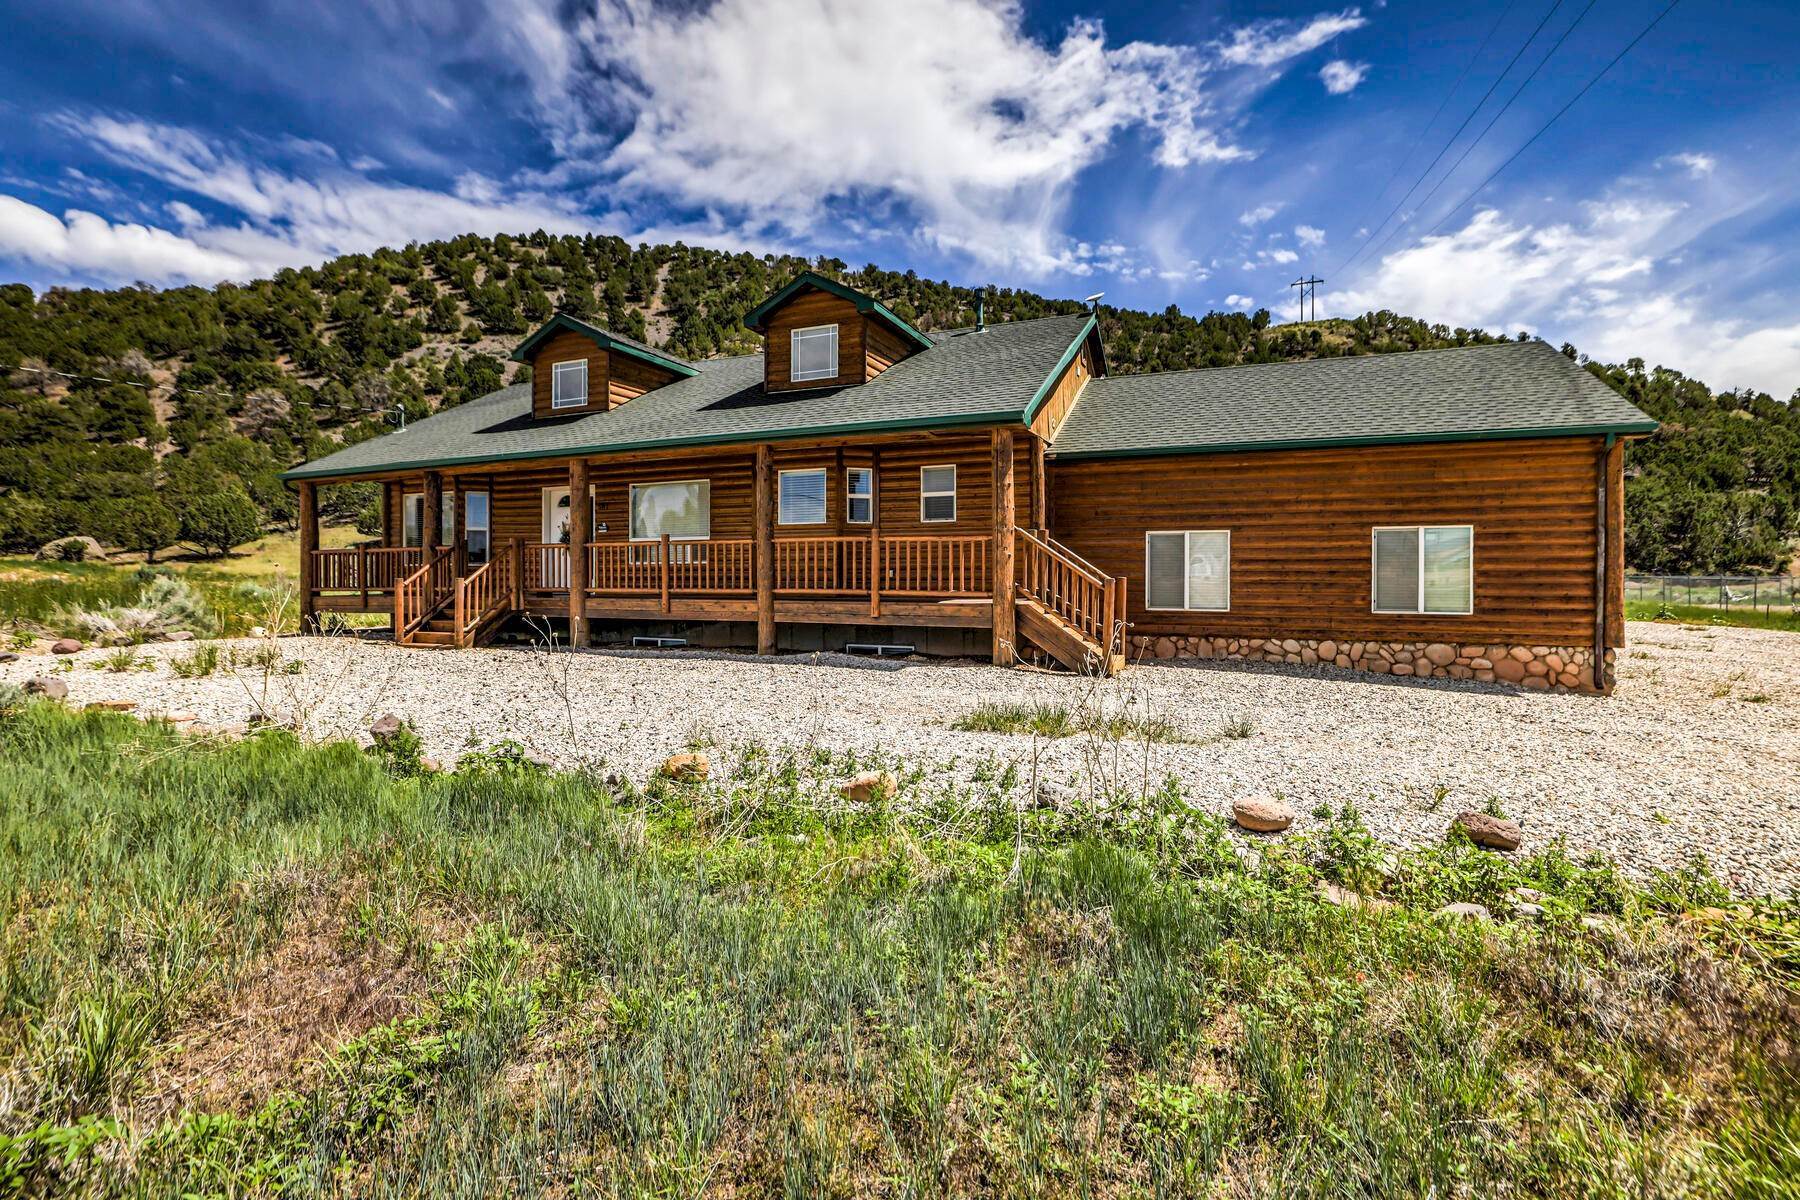 Single Family Homes for Sale at Amazing Vacation Rental Cabin Retreat Nestled On The Mountain Near Brian Head 581 W Old Hwy 91 Parowan, Utah 84761 United States